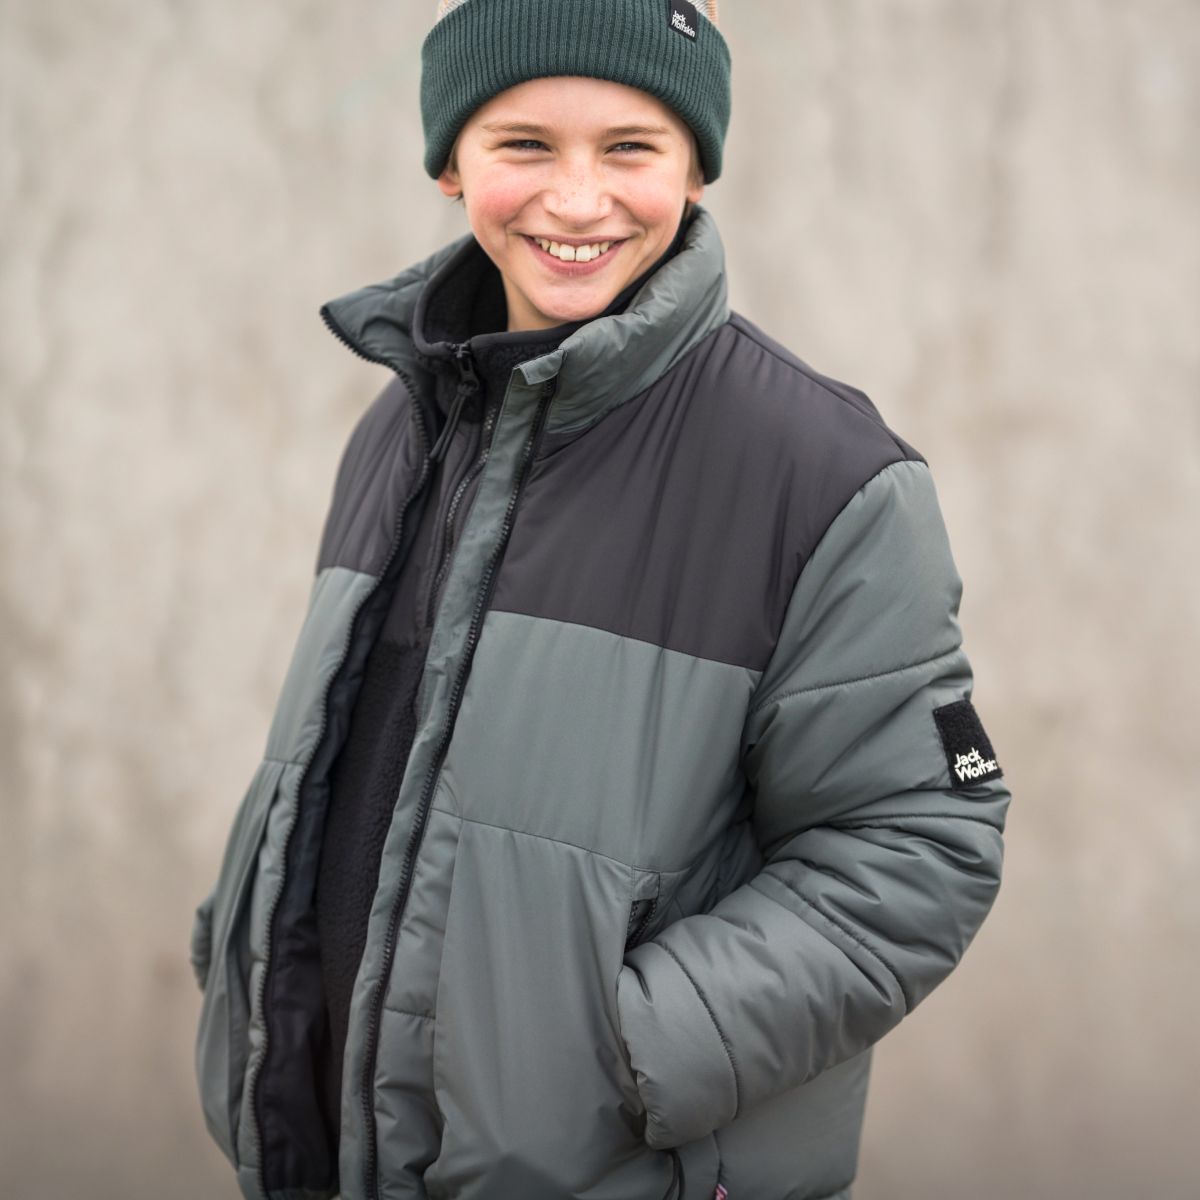 Boy with winter jacket laughing